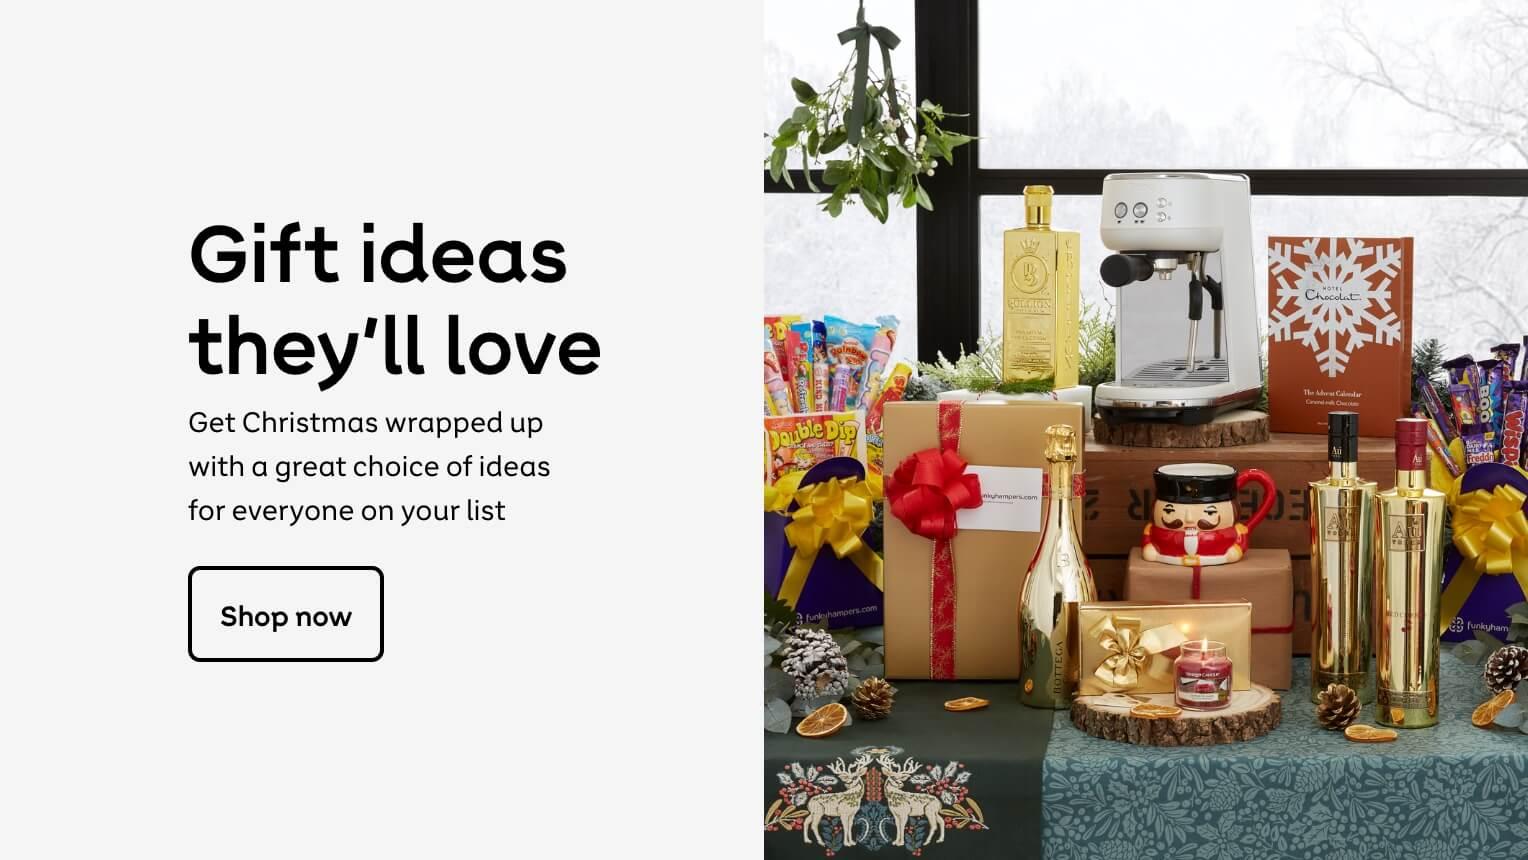 Gift ideas they'll love. Get Christmas wrapped up with a great choise of ideas for everyone on your list.